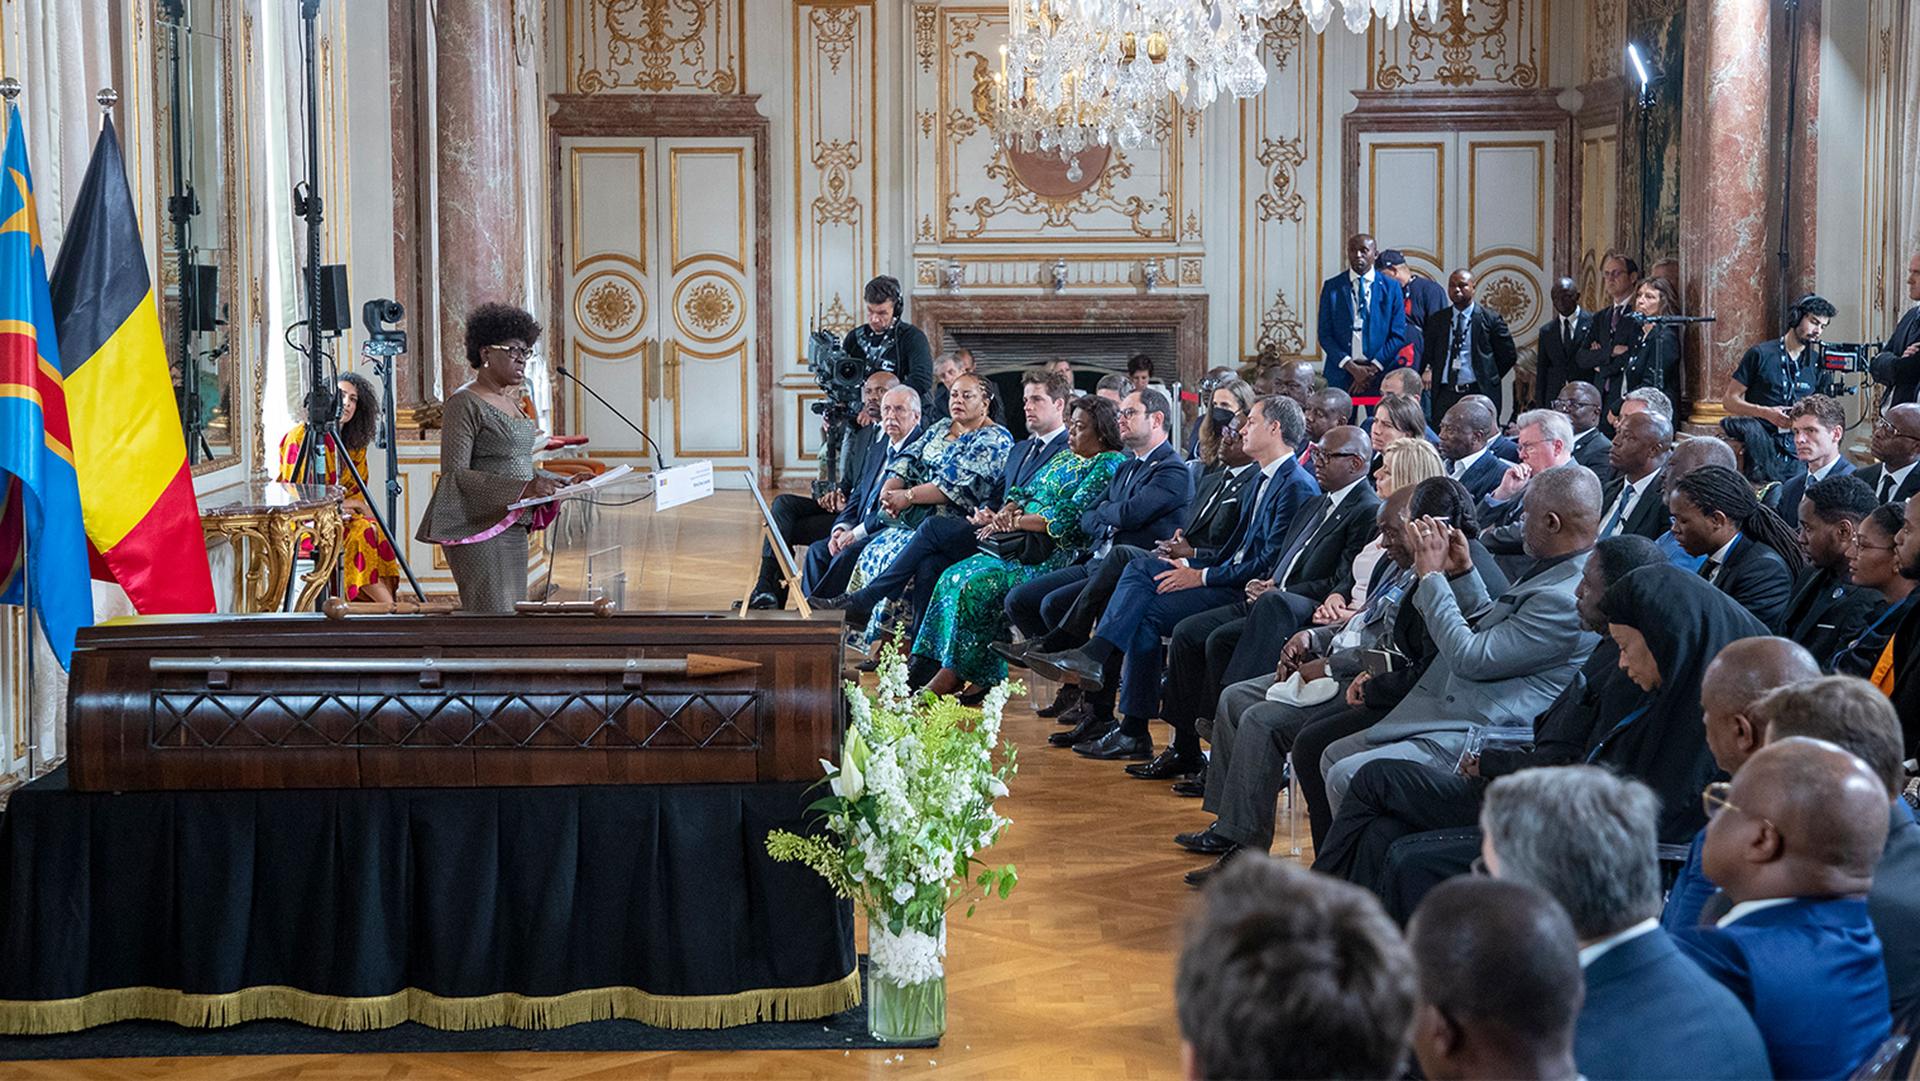 Juliana Lumumba, the daughter of Patrice Lumumba, speaks during a ceremony to return the remains of her father to the family at the Egmont Palace in Brussels